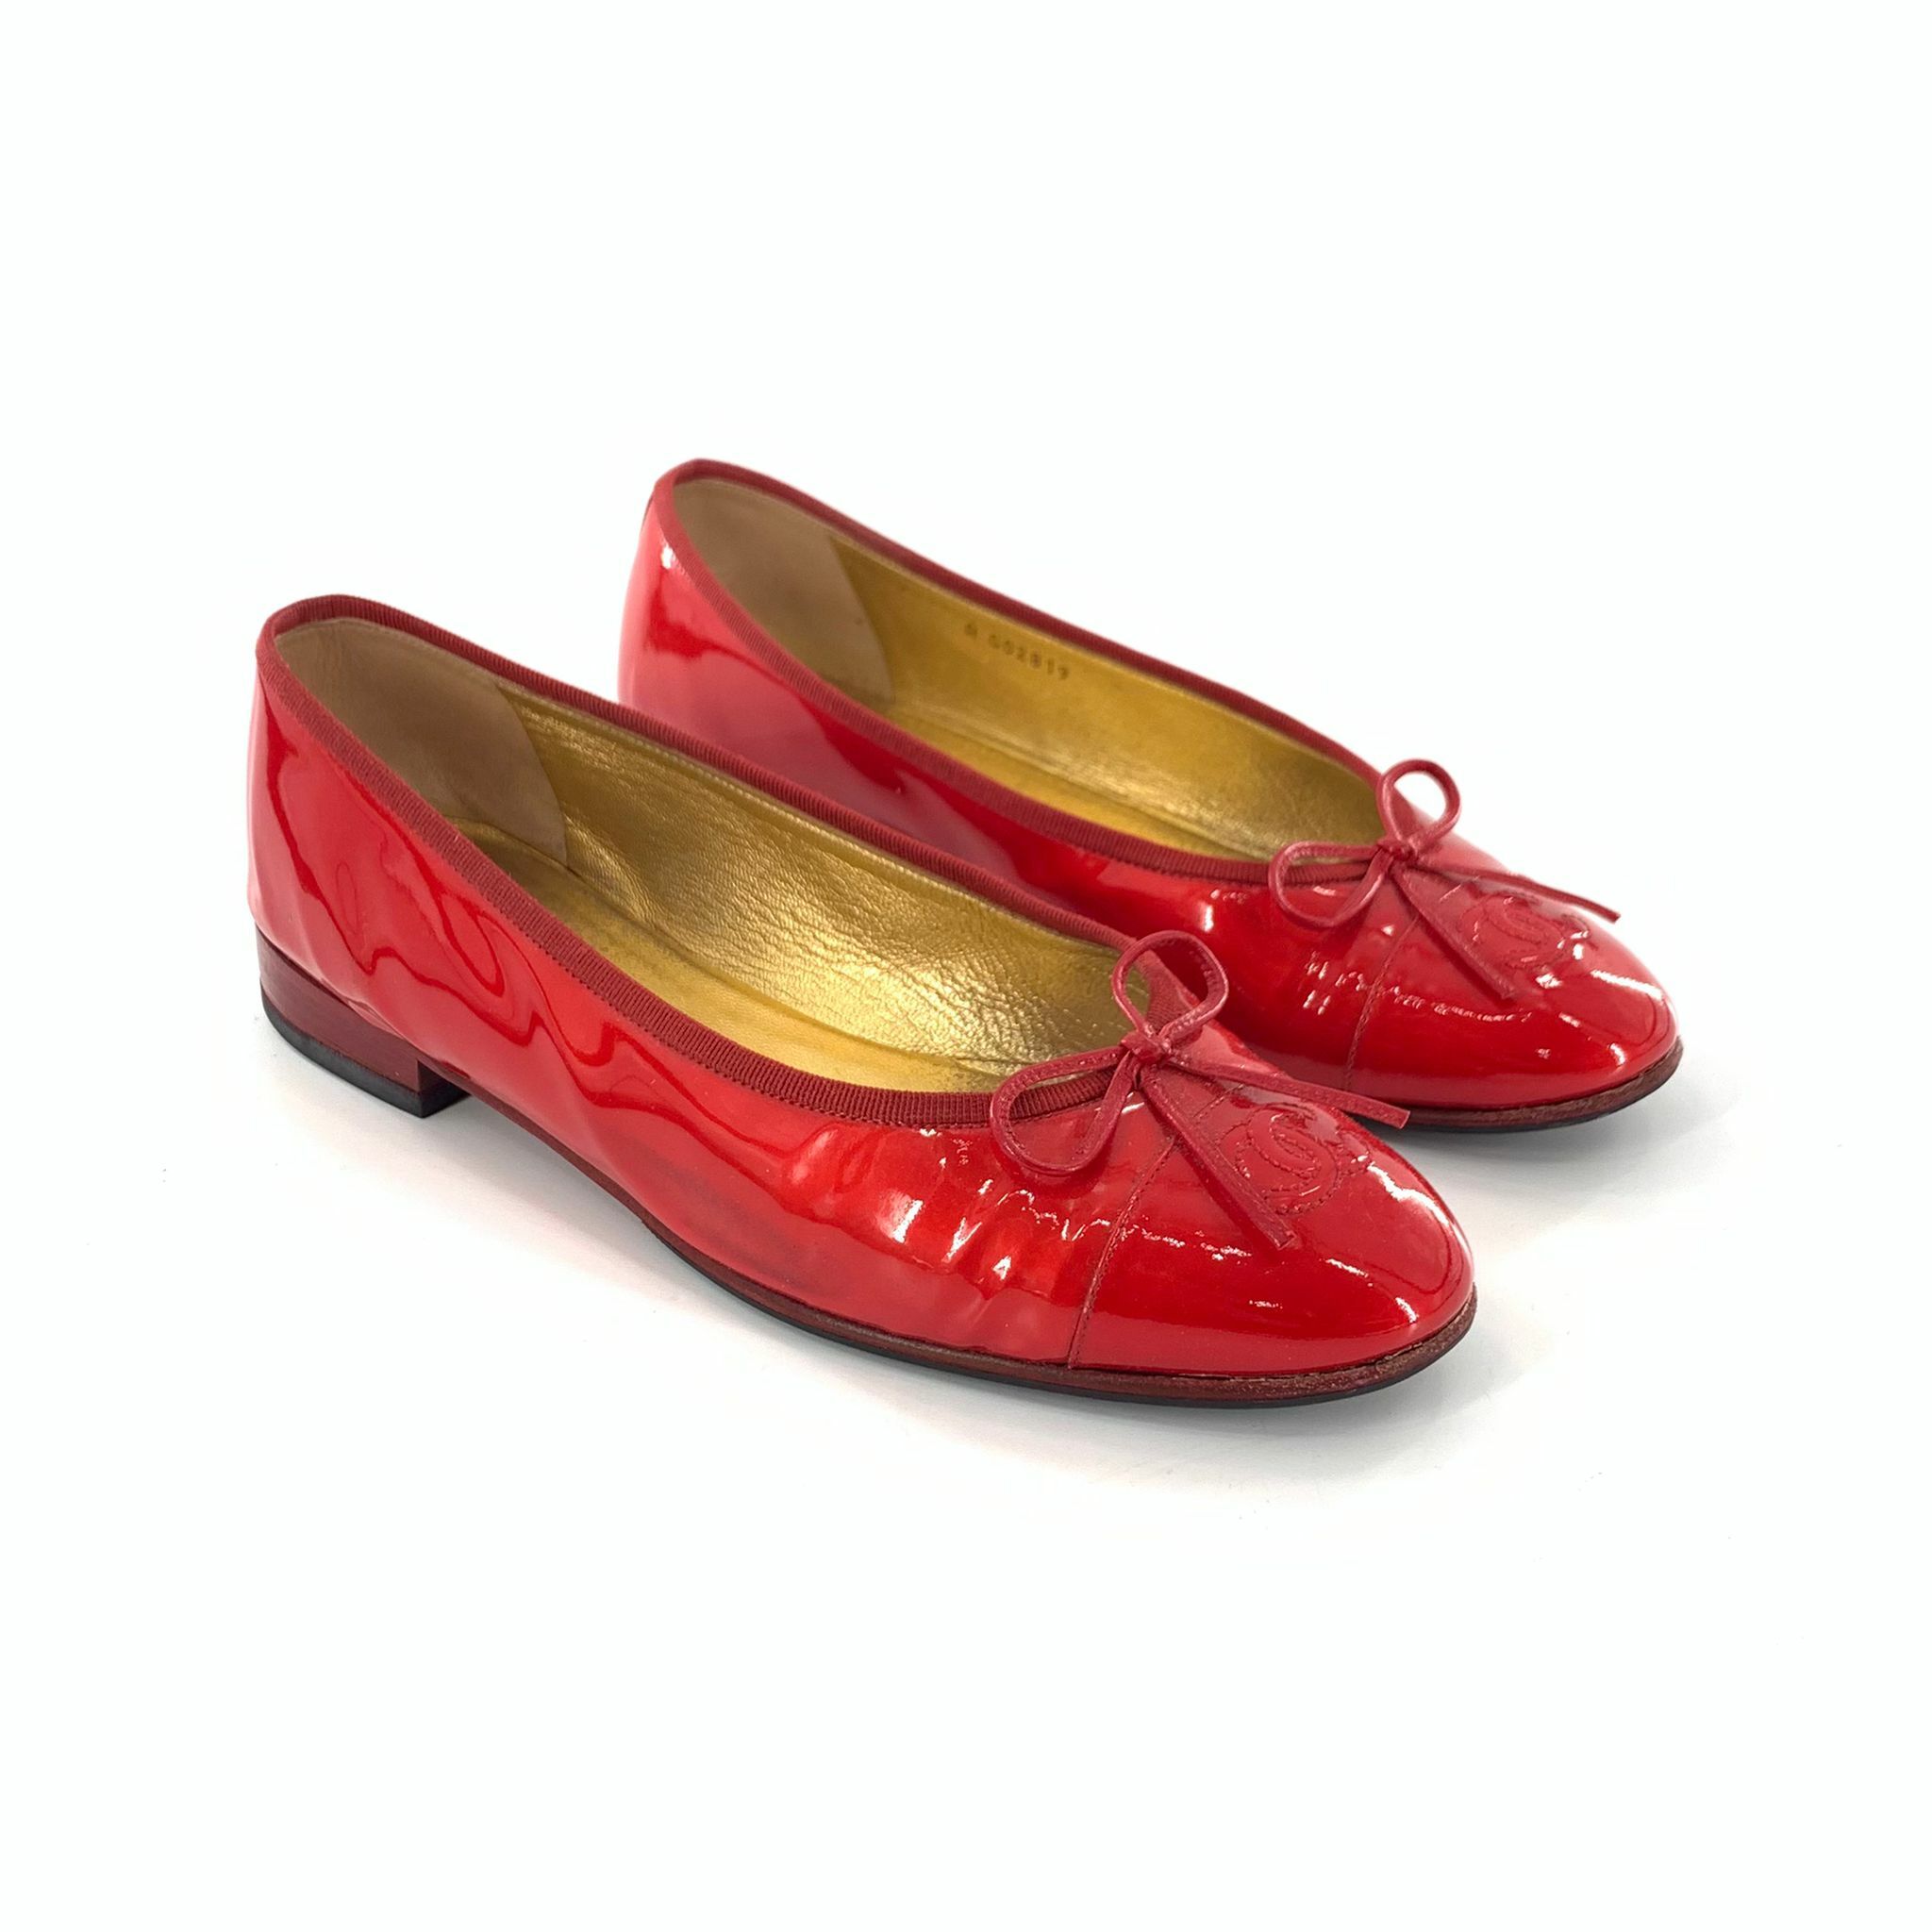 CHANEL PRE-OWNED BALLERINA FLAT G02819